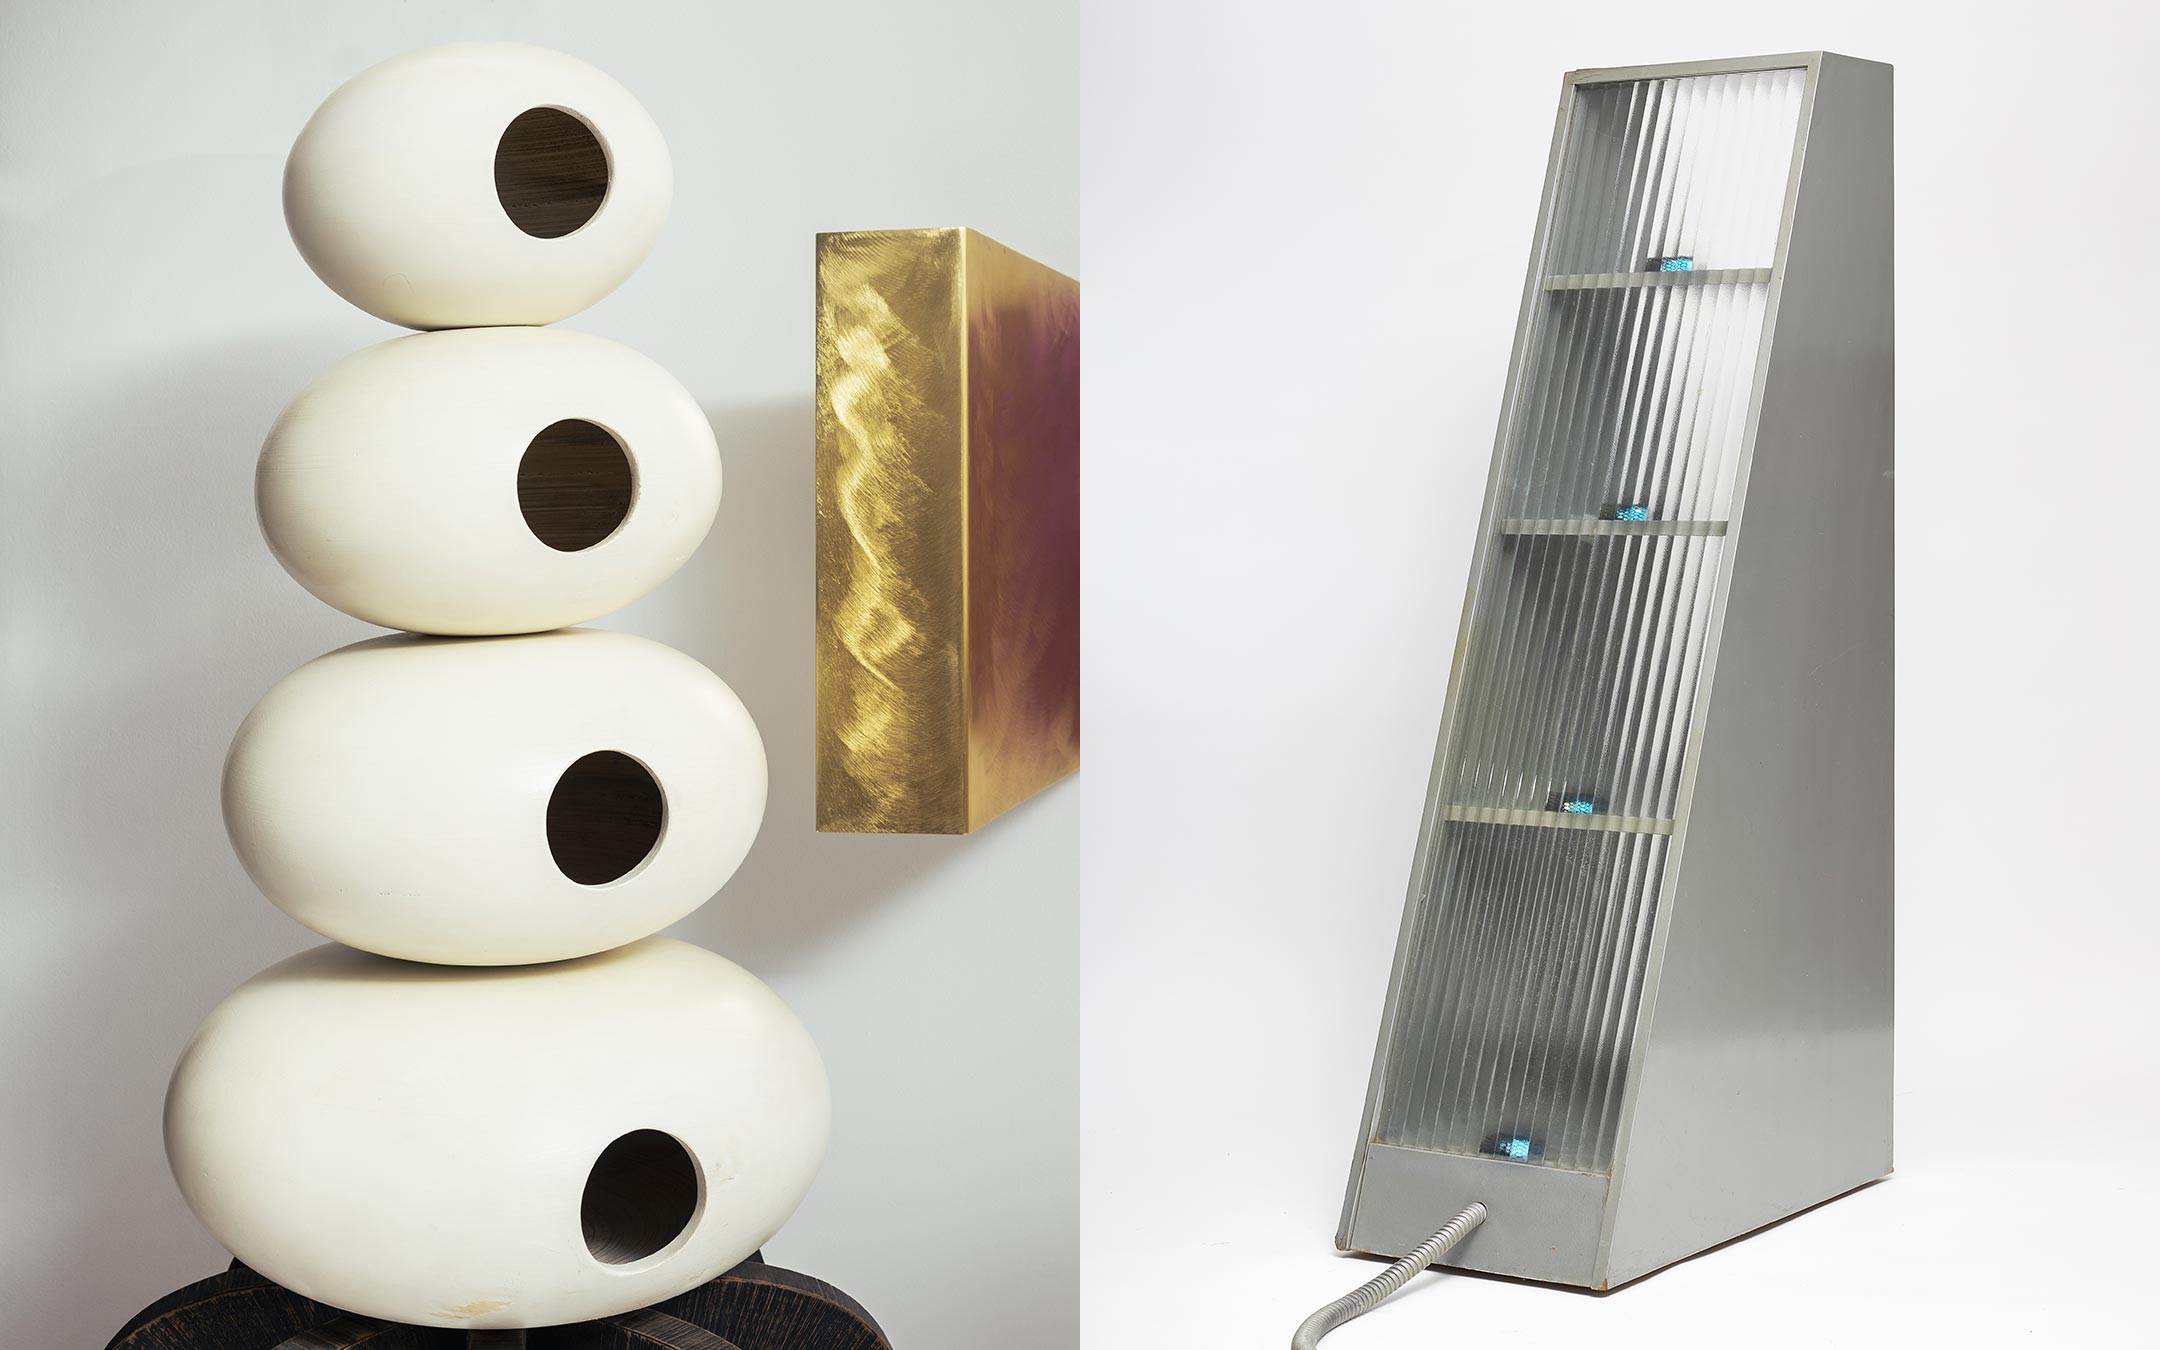 ‘The Cabinet of the Ancient Squid’ by Richard Snyder (left) and the Karnak Rolling bookcase by James Hong (right)